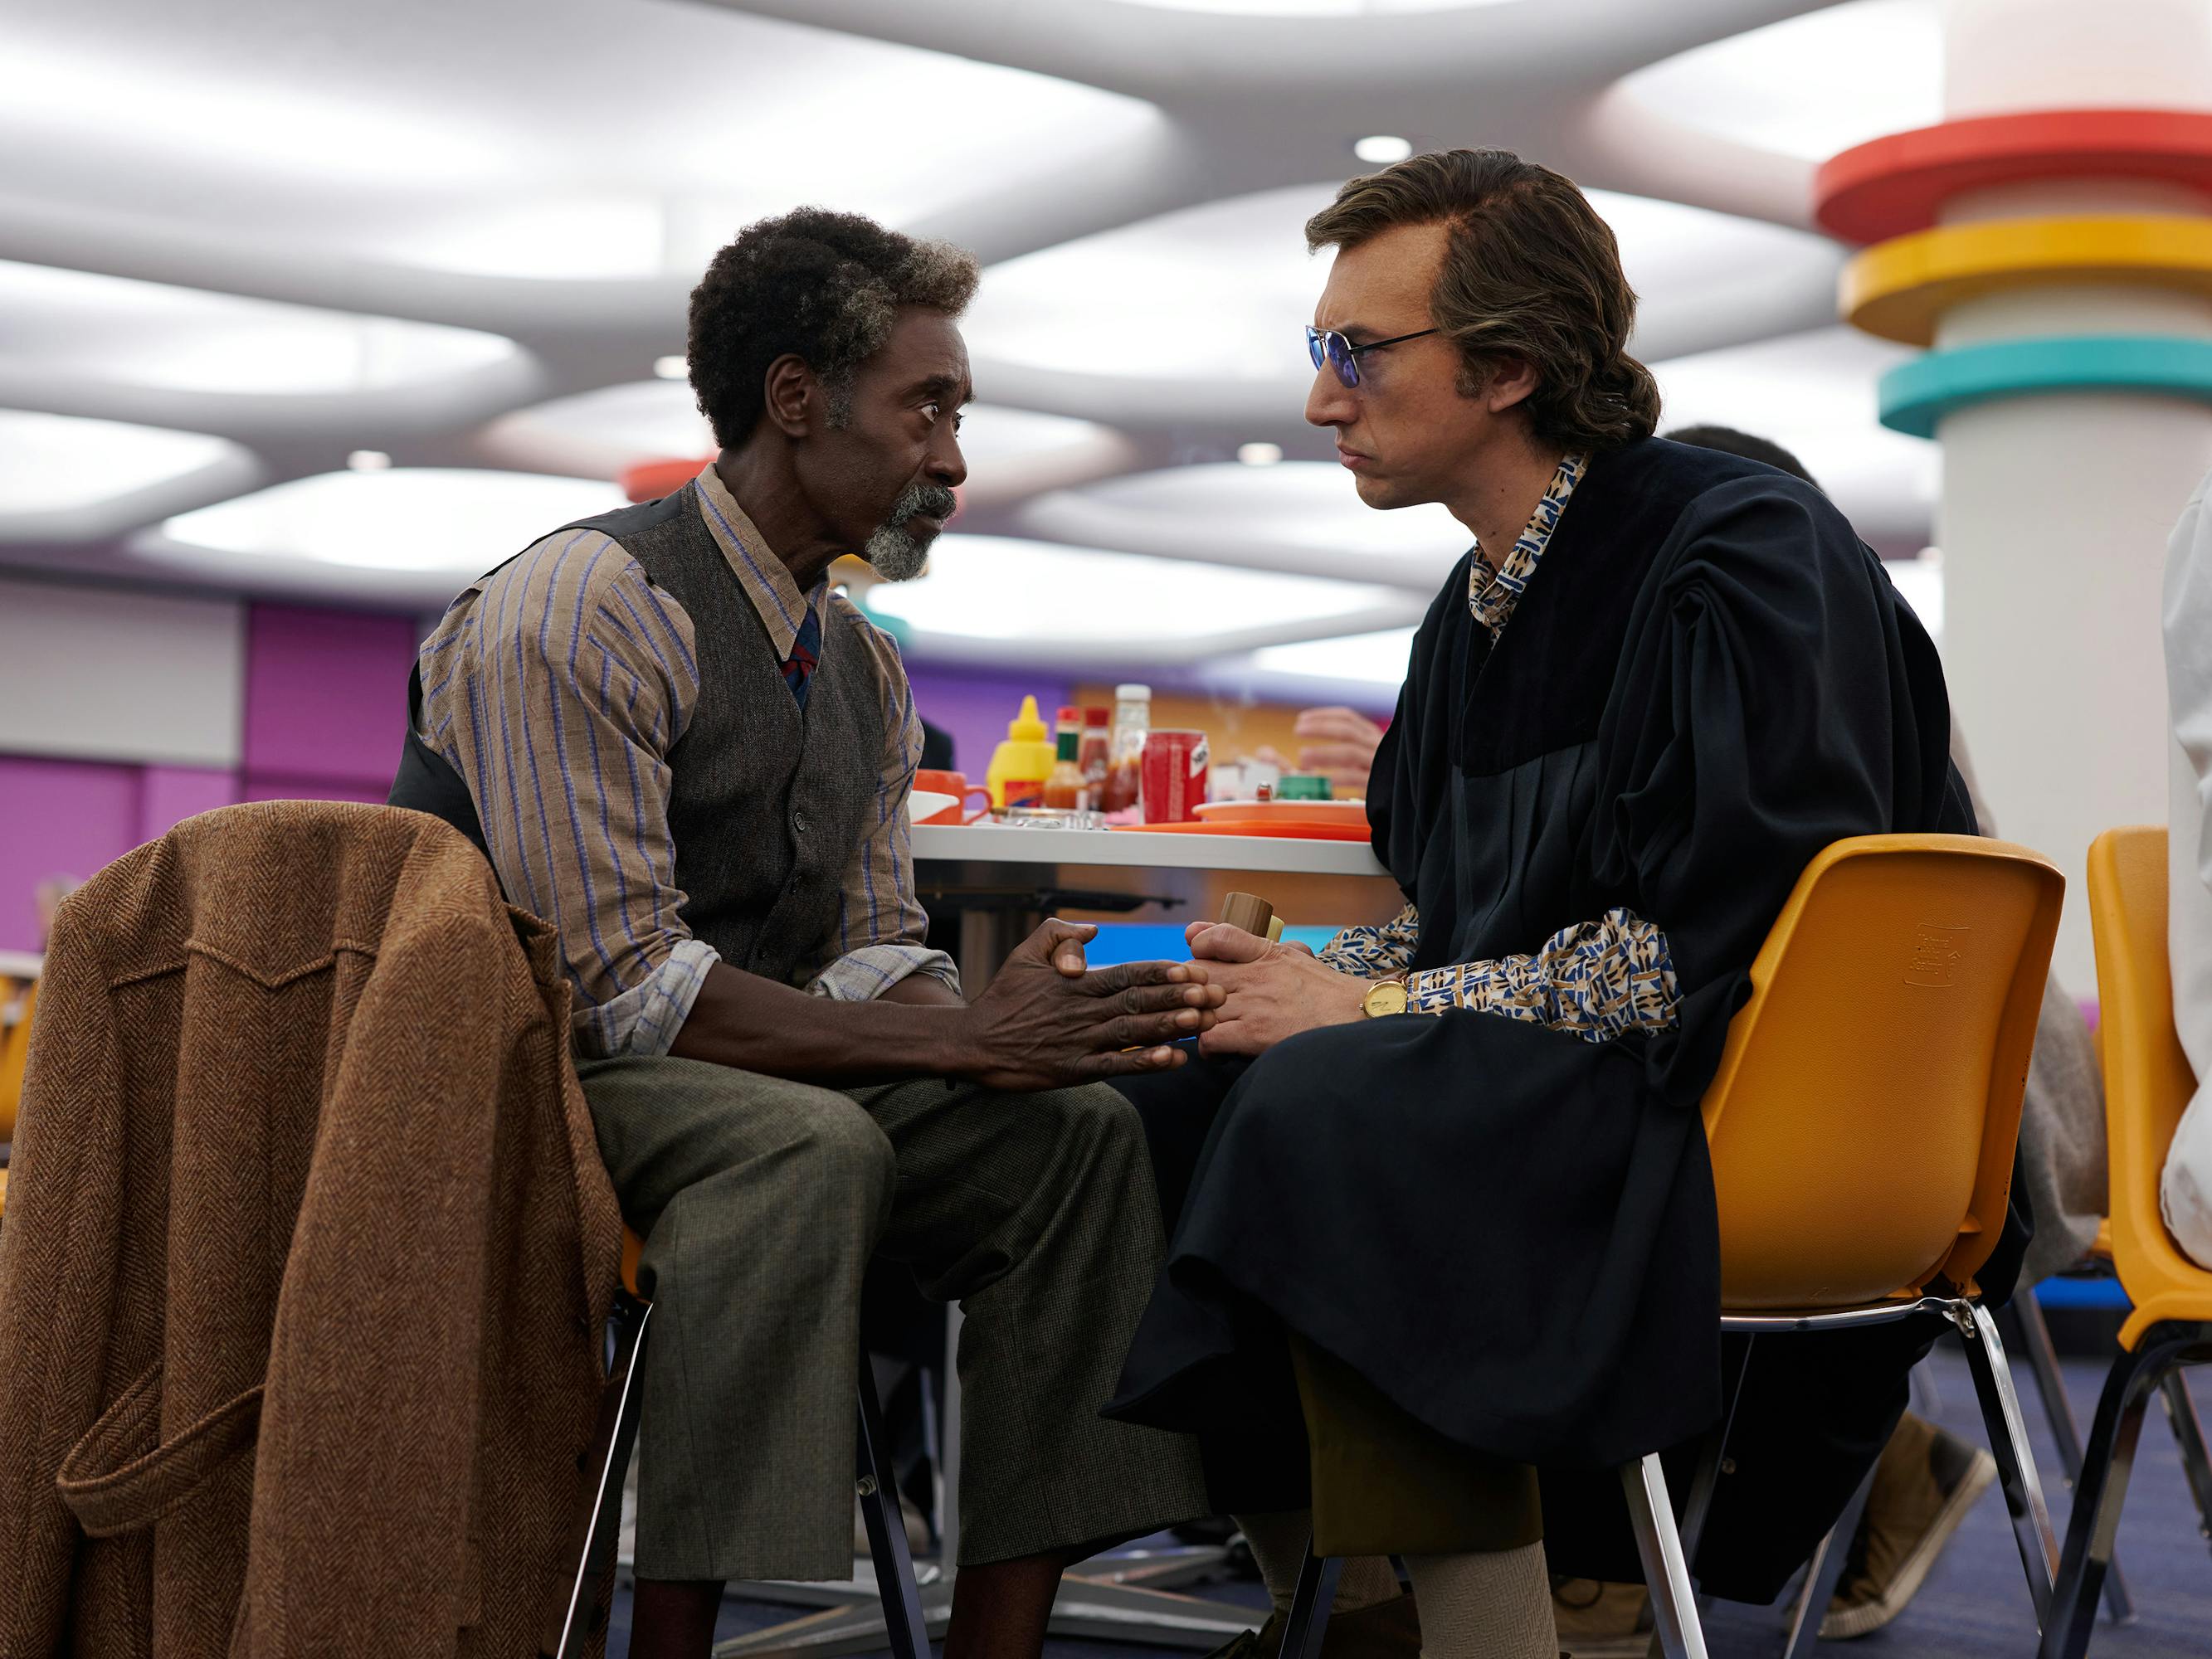 Murray Siskind (Don Cheadle) and Jack Gladney (Adam Driver) sit in yellow chairs at a table in a primary-colored decorated room.